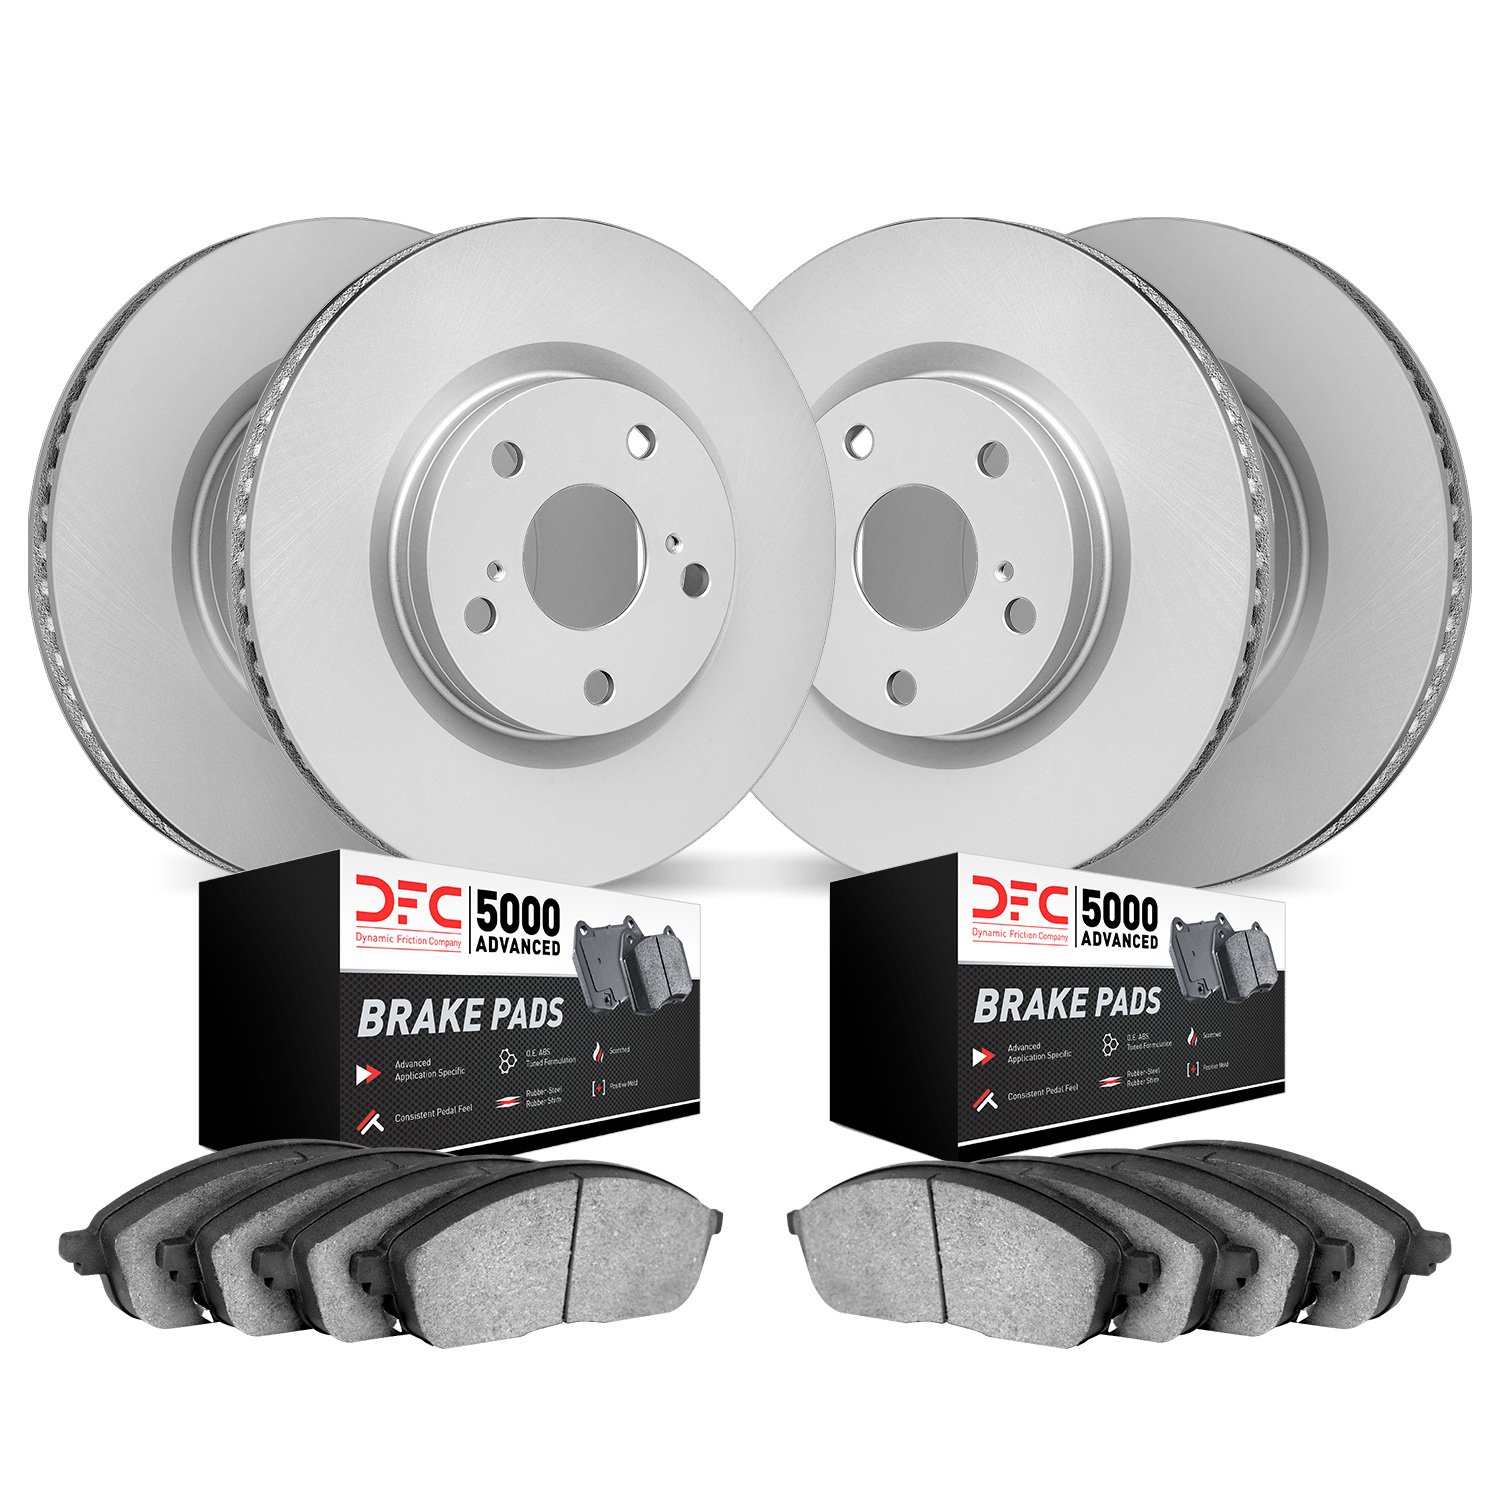 4504-54138 Geospec Brake Rotors w/5000 Advanced Brake Pads Kit, 2007-2014 Ford/Lincoln/Mercury/Mazda, Position: Front and Rear